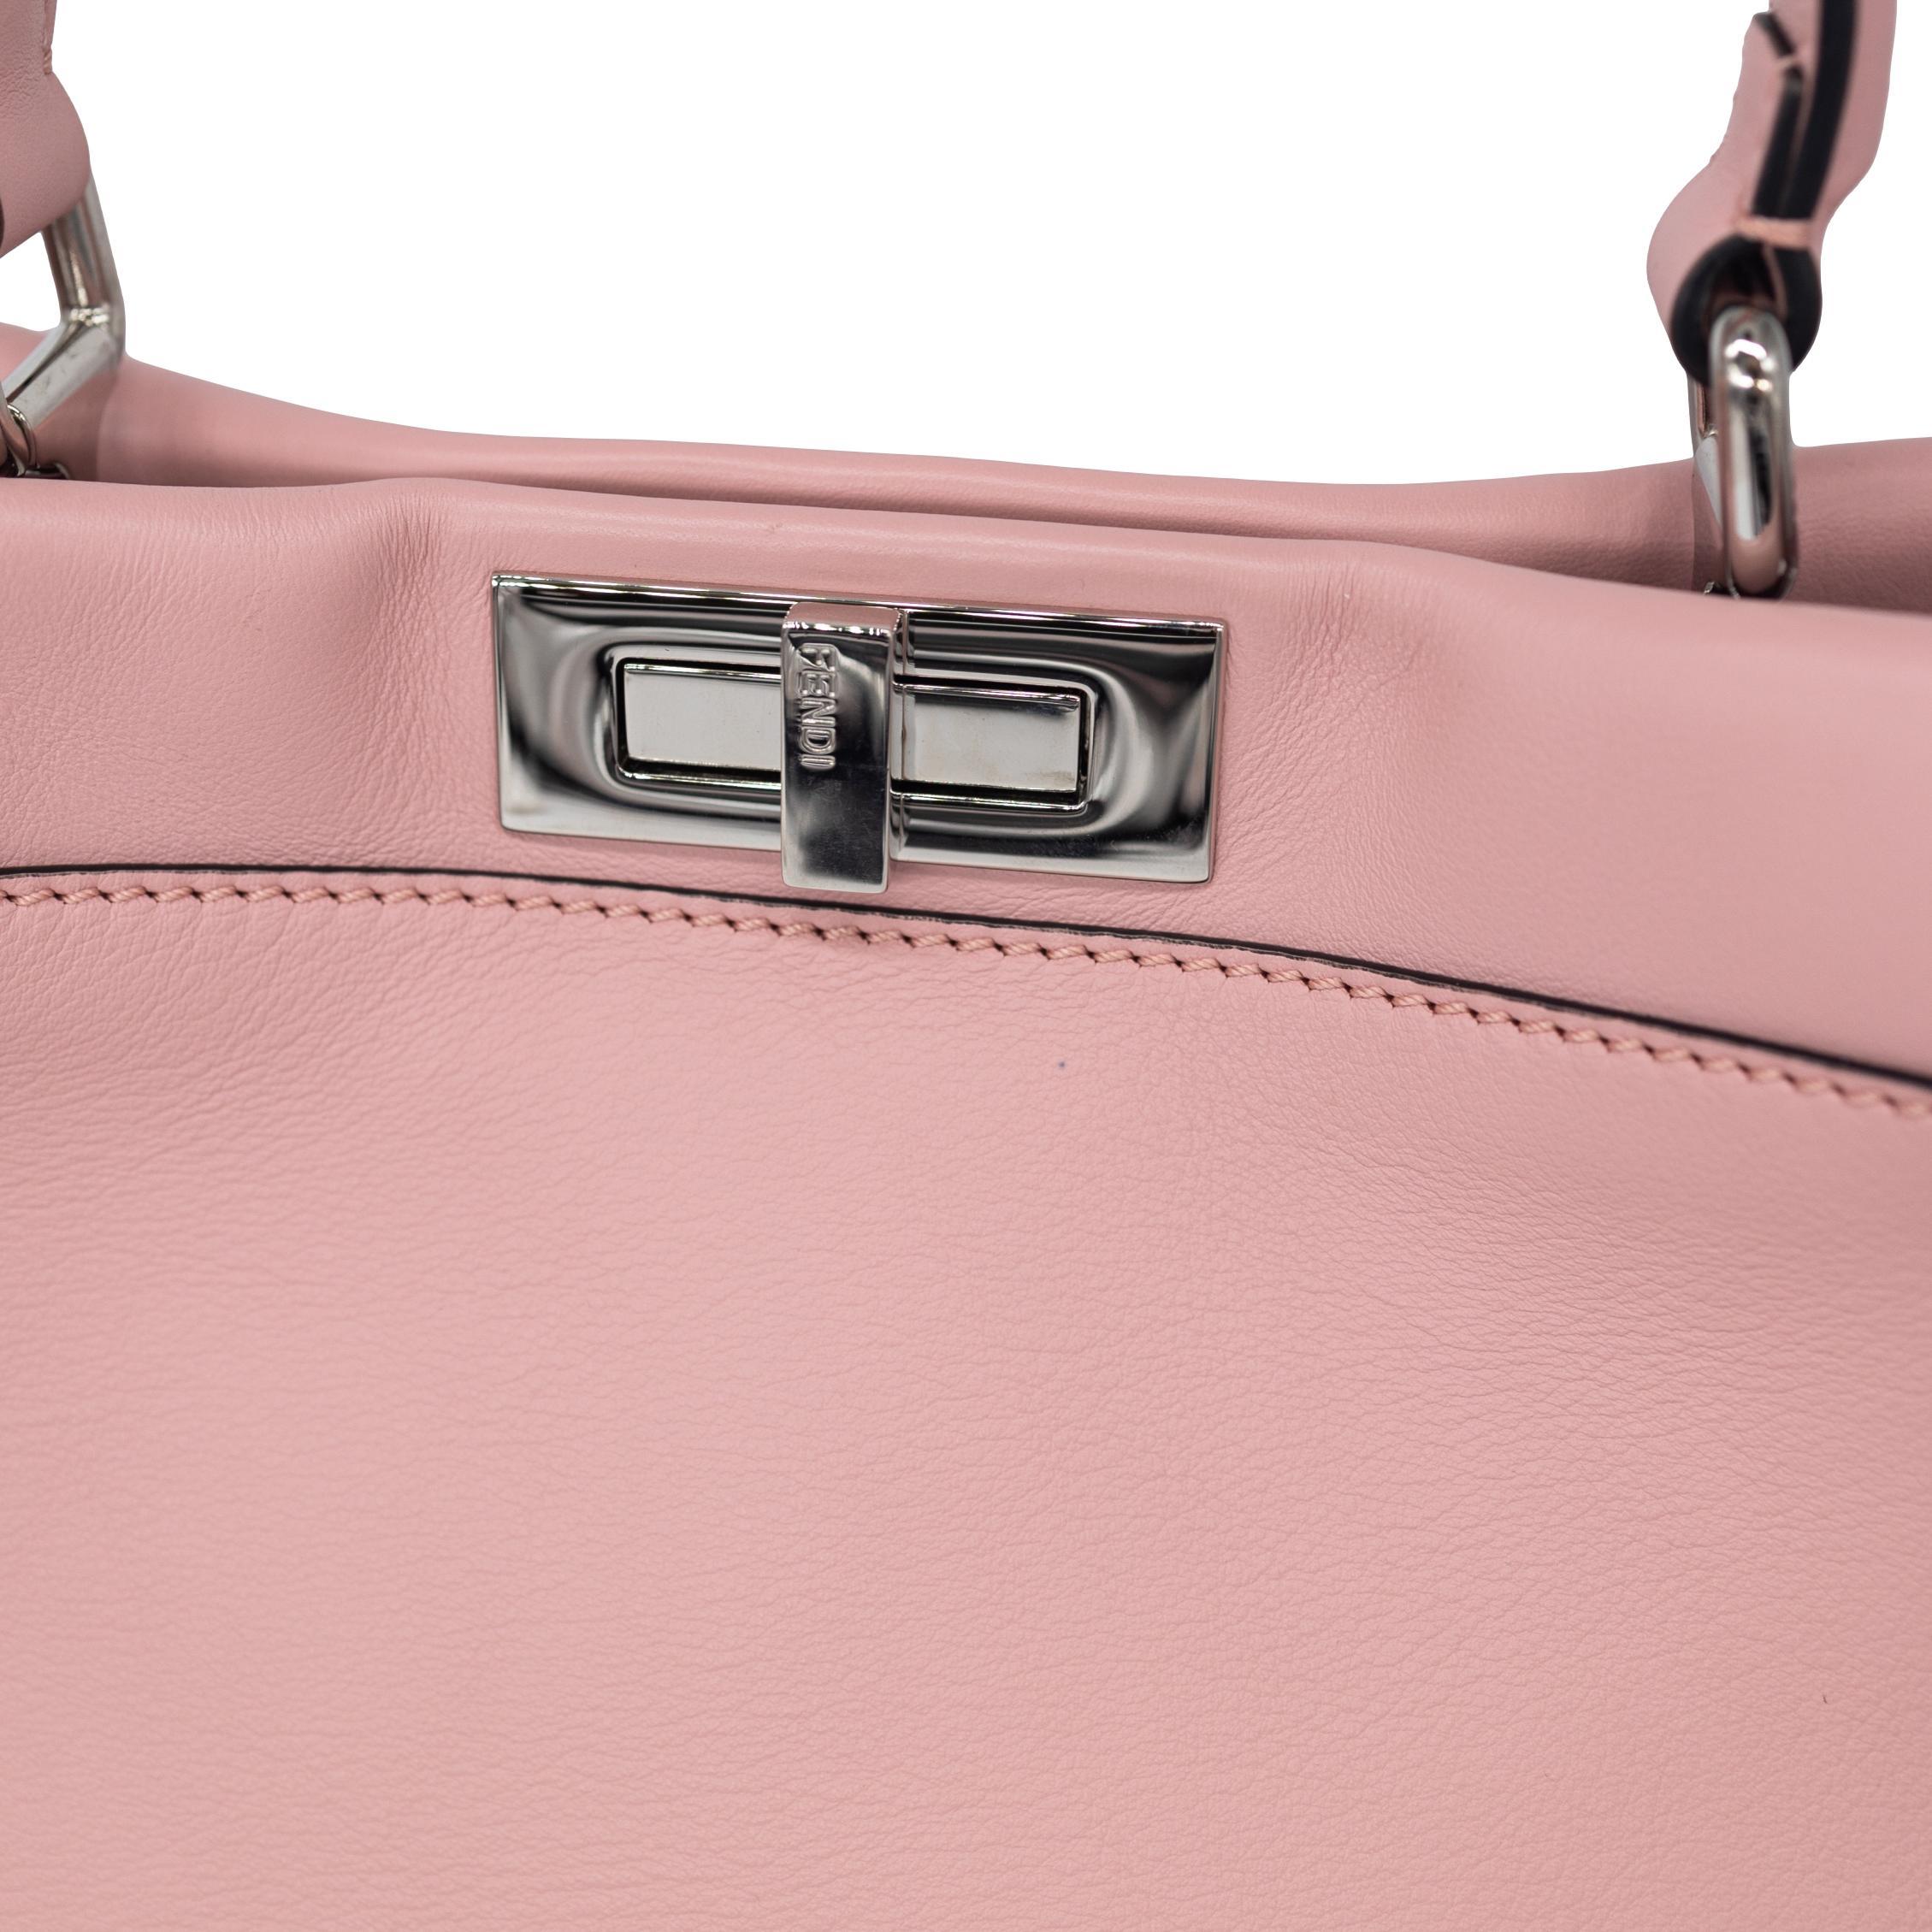 Fendi Woven Pink Leather Medium Whipstitched Peekaboo Top Handle Shoulder Bag, 2015. This iconic and highly desirable 